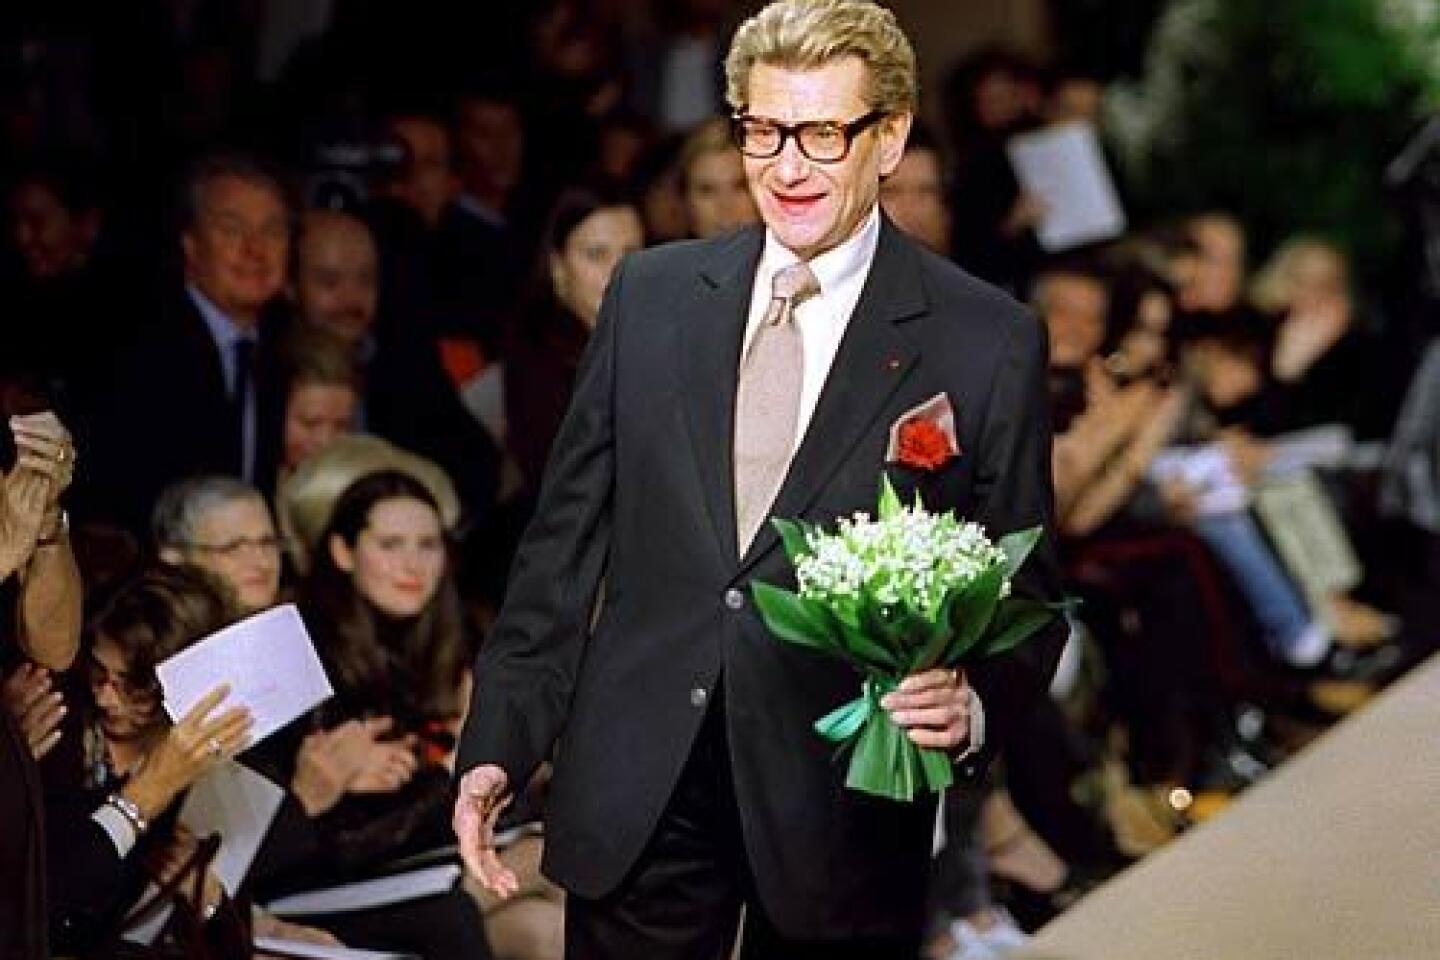 Yves Saint Laurent, 71; icon of French fashion design - Los Angeles Times